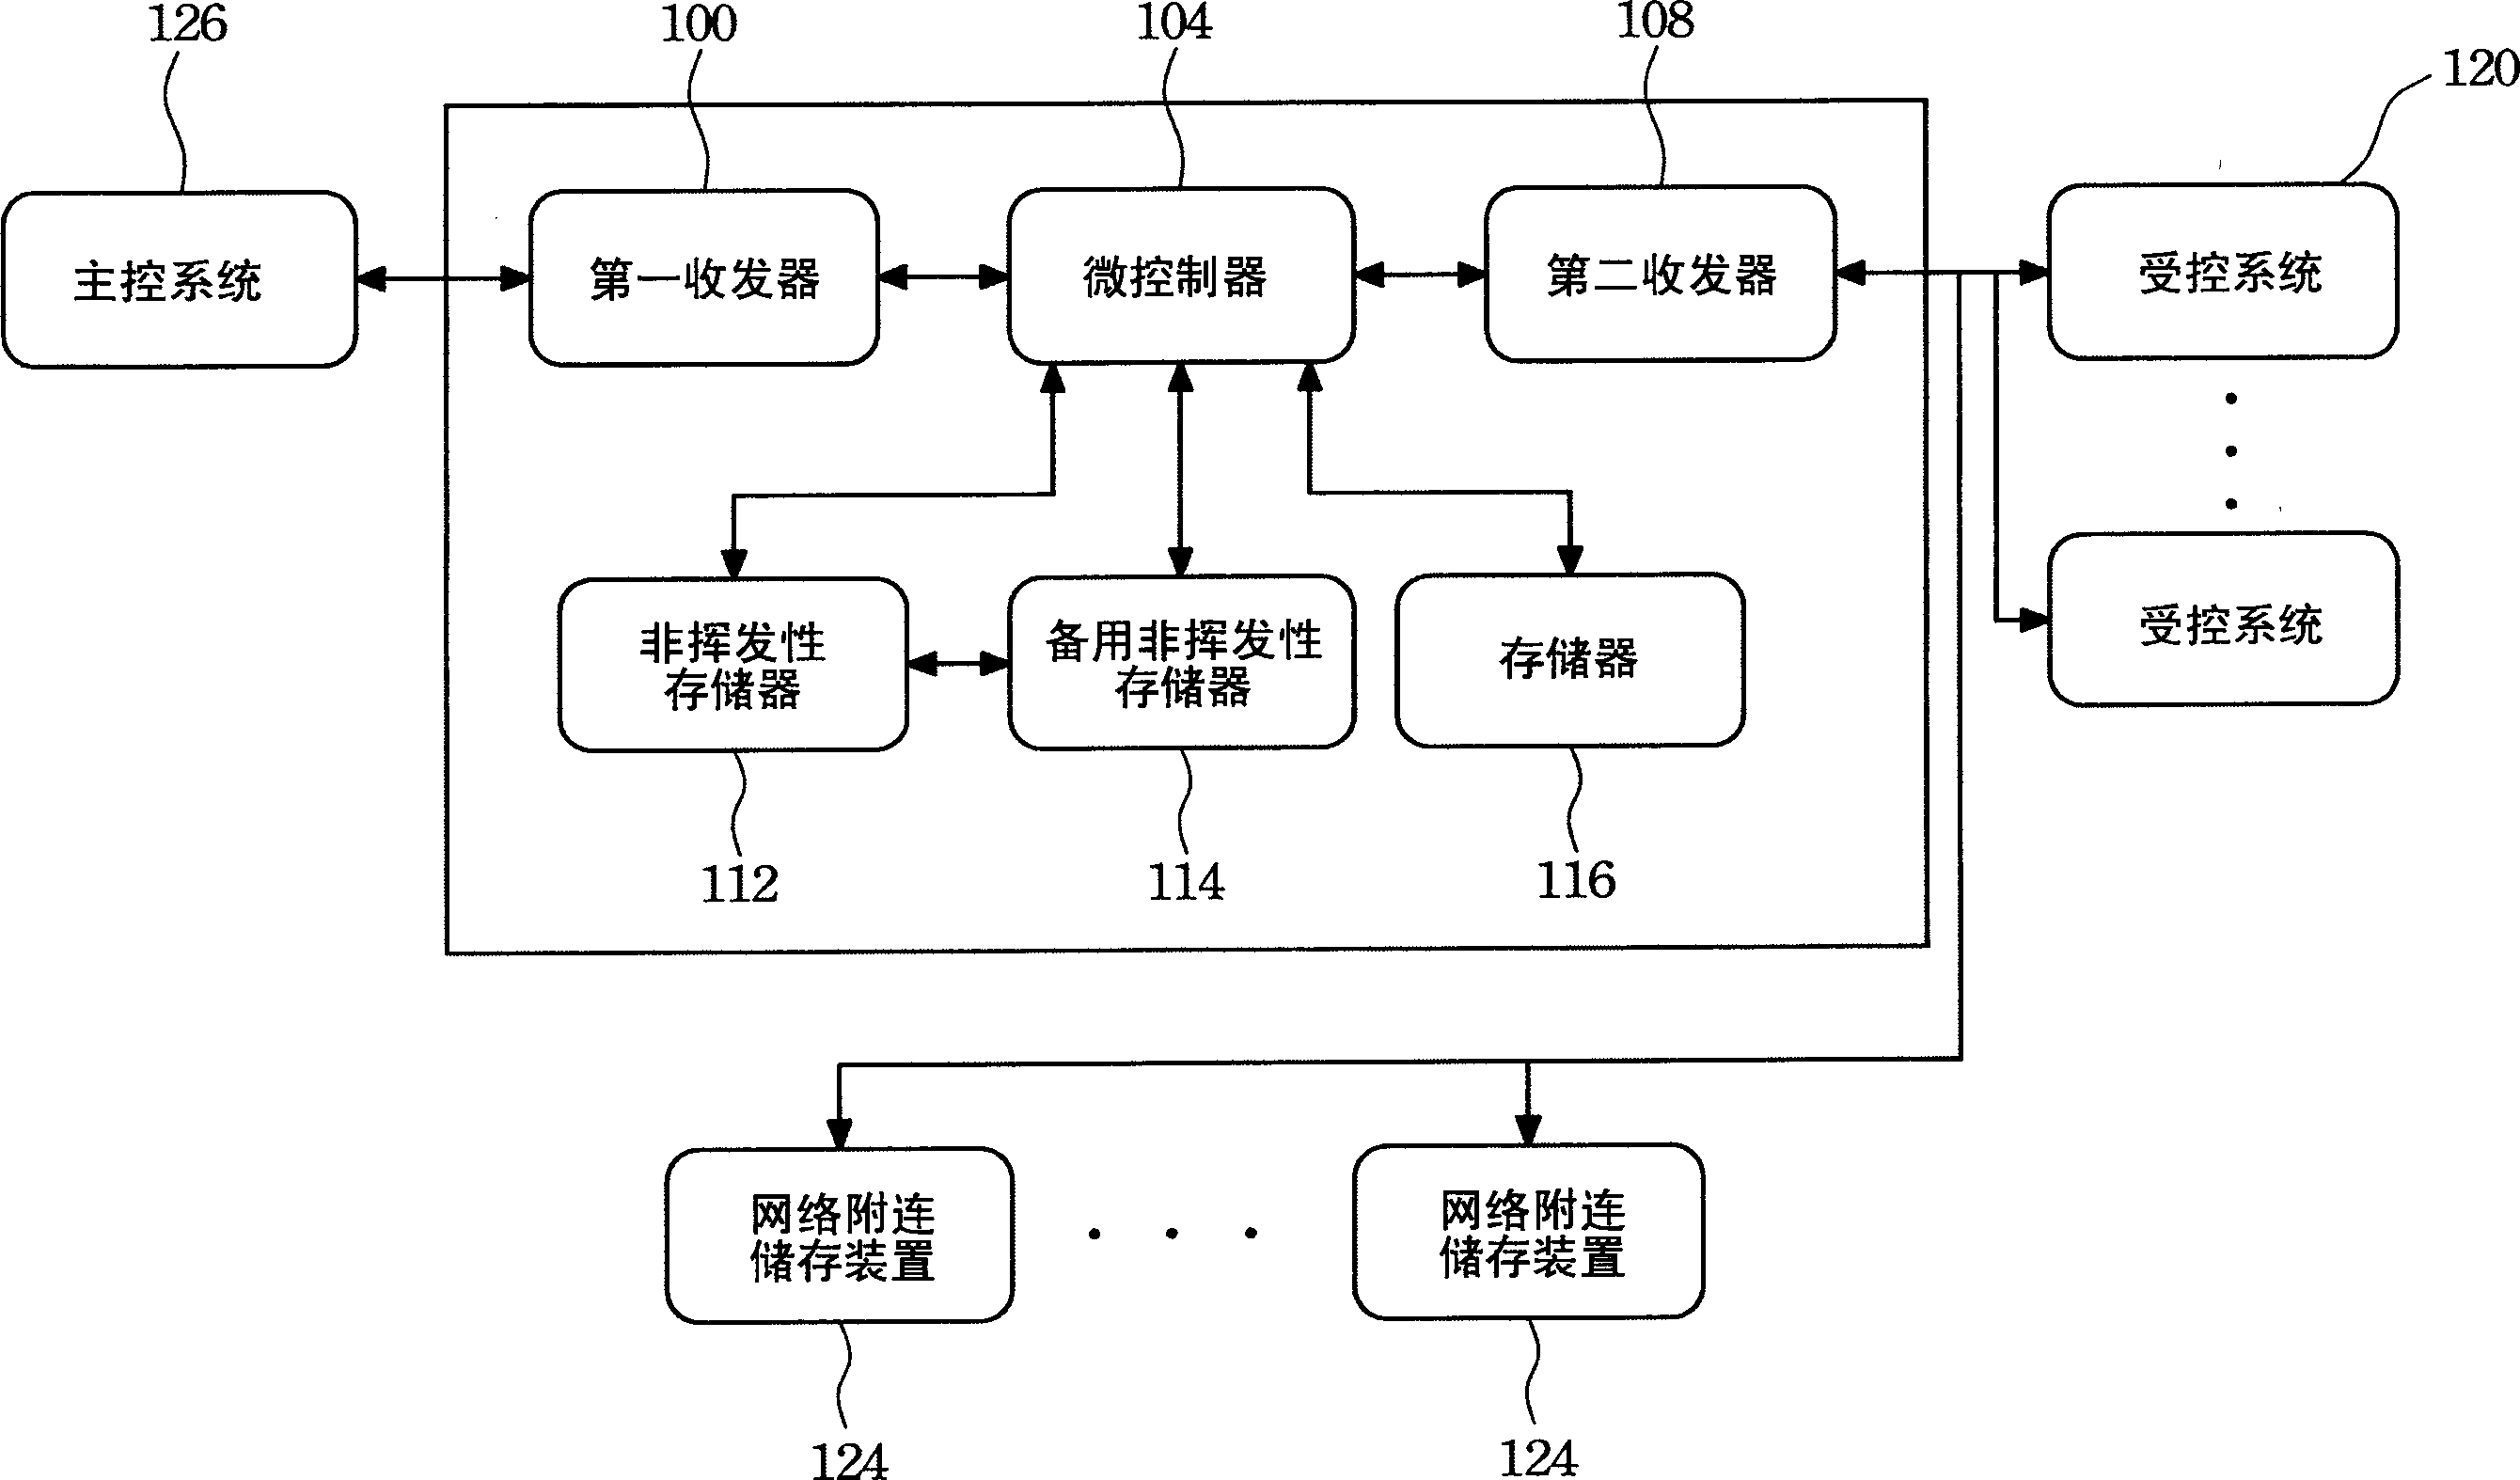 Back-up method for operational flowchart records in communication accessing iterface device